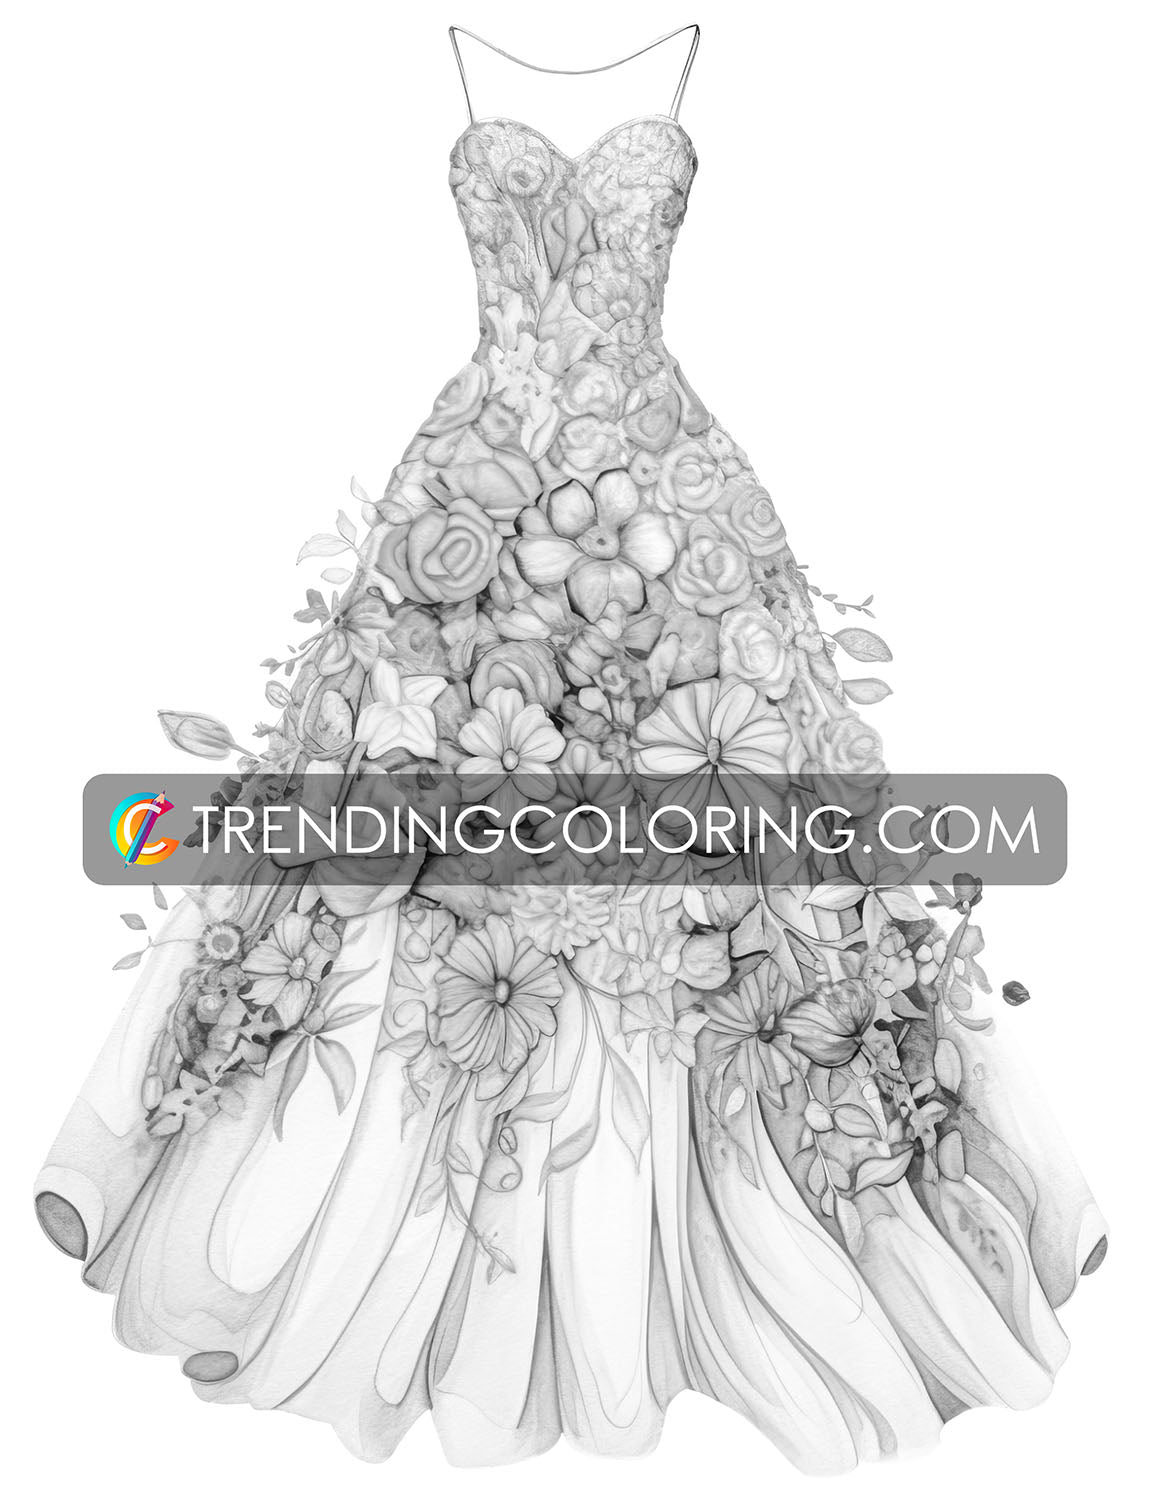 25 Floral Dress Grayscale Coloring Pages  - Instant Download - Printable Dark/Light